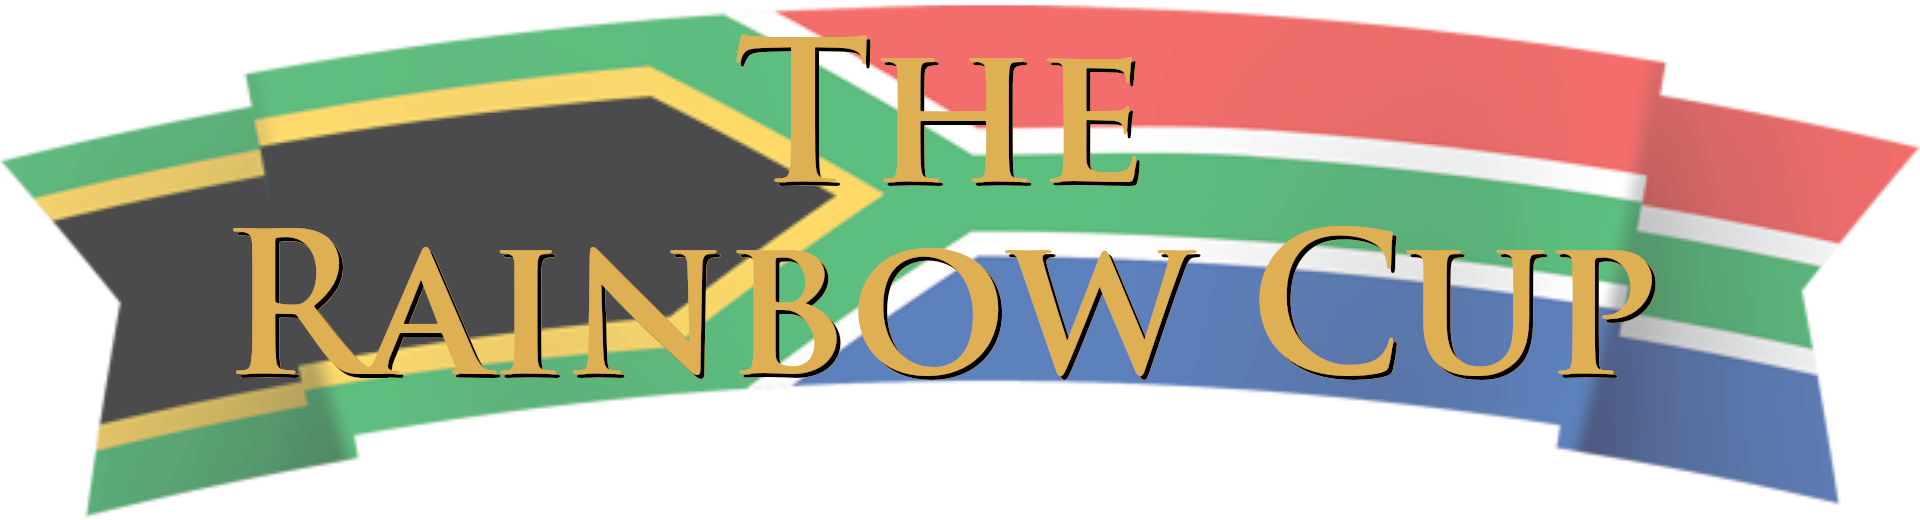 Rainbow Cup Banner.png